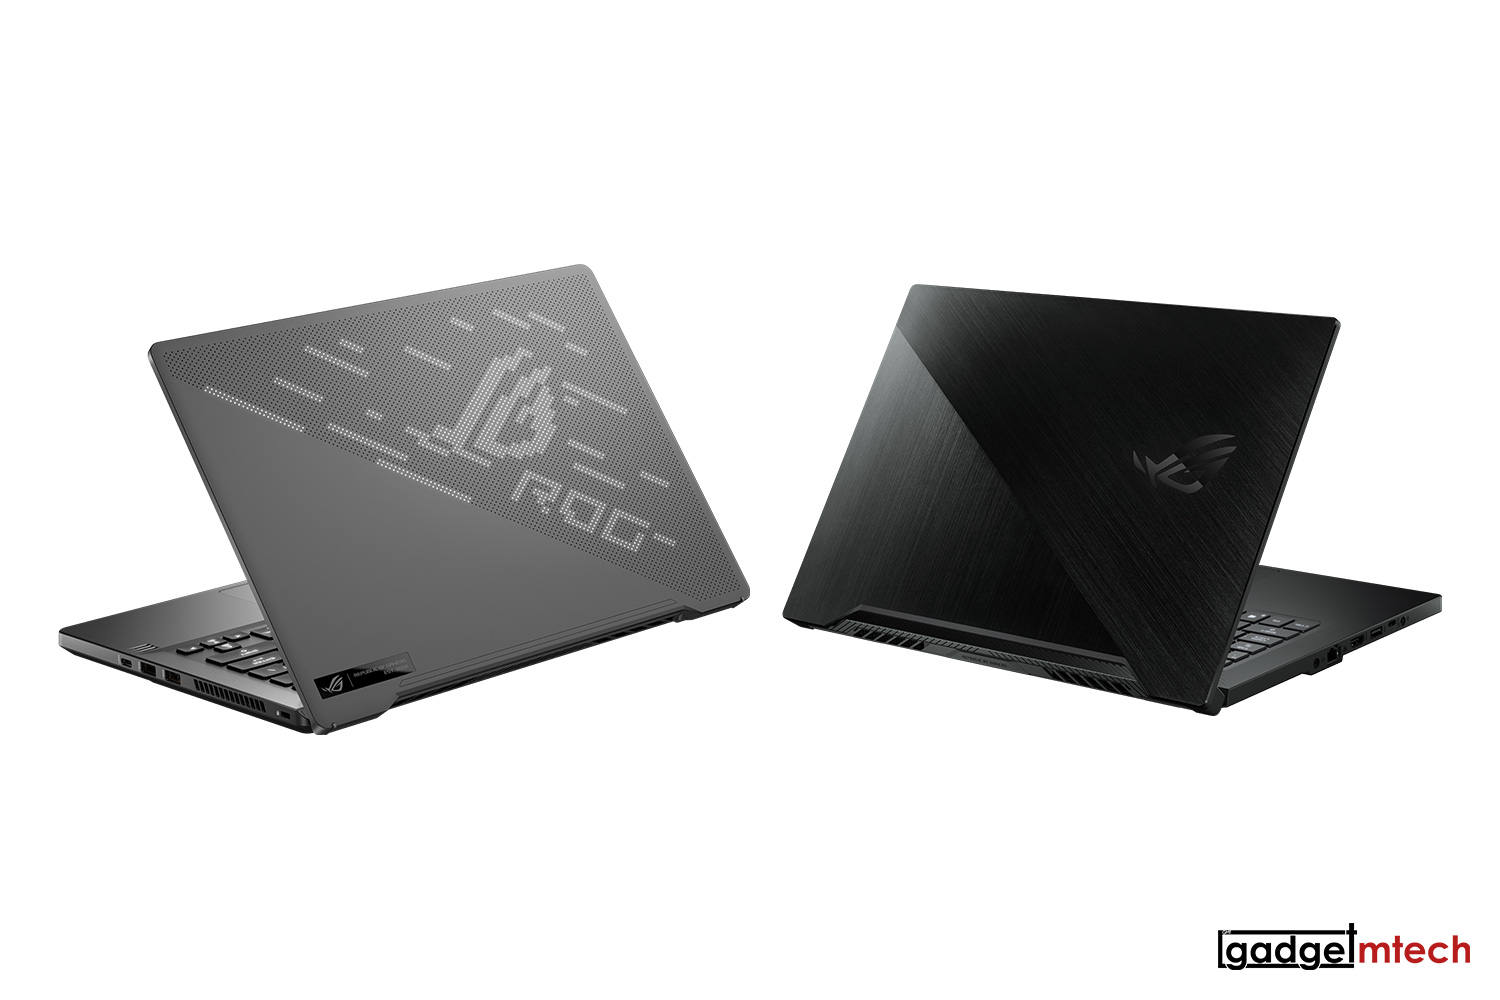 ASUS ROG Zephyrus G14 and G15 Officially Announced